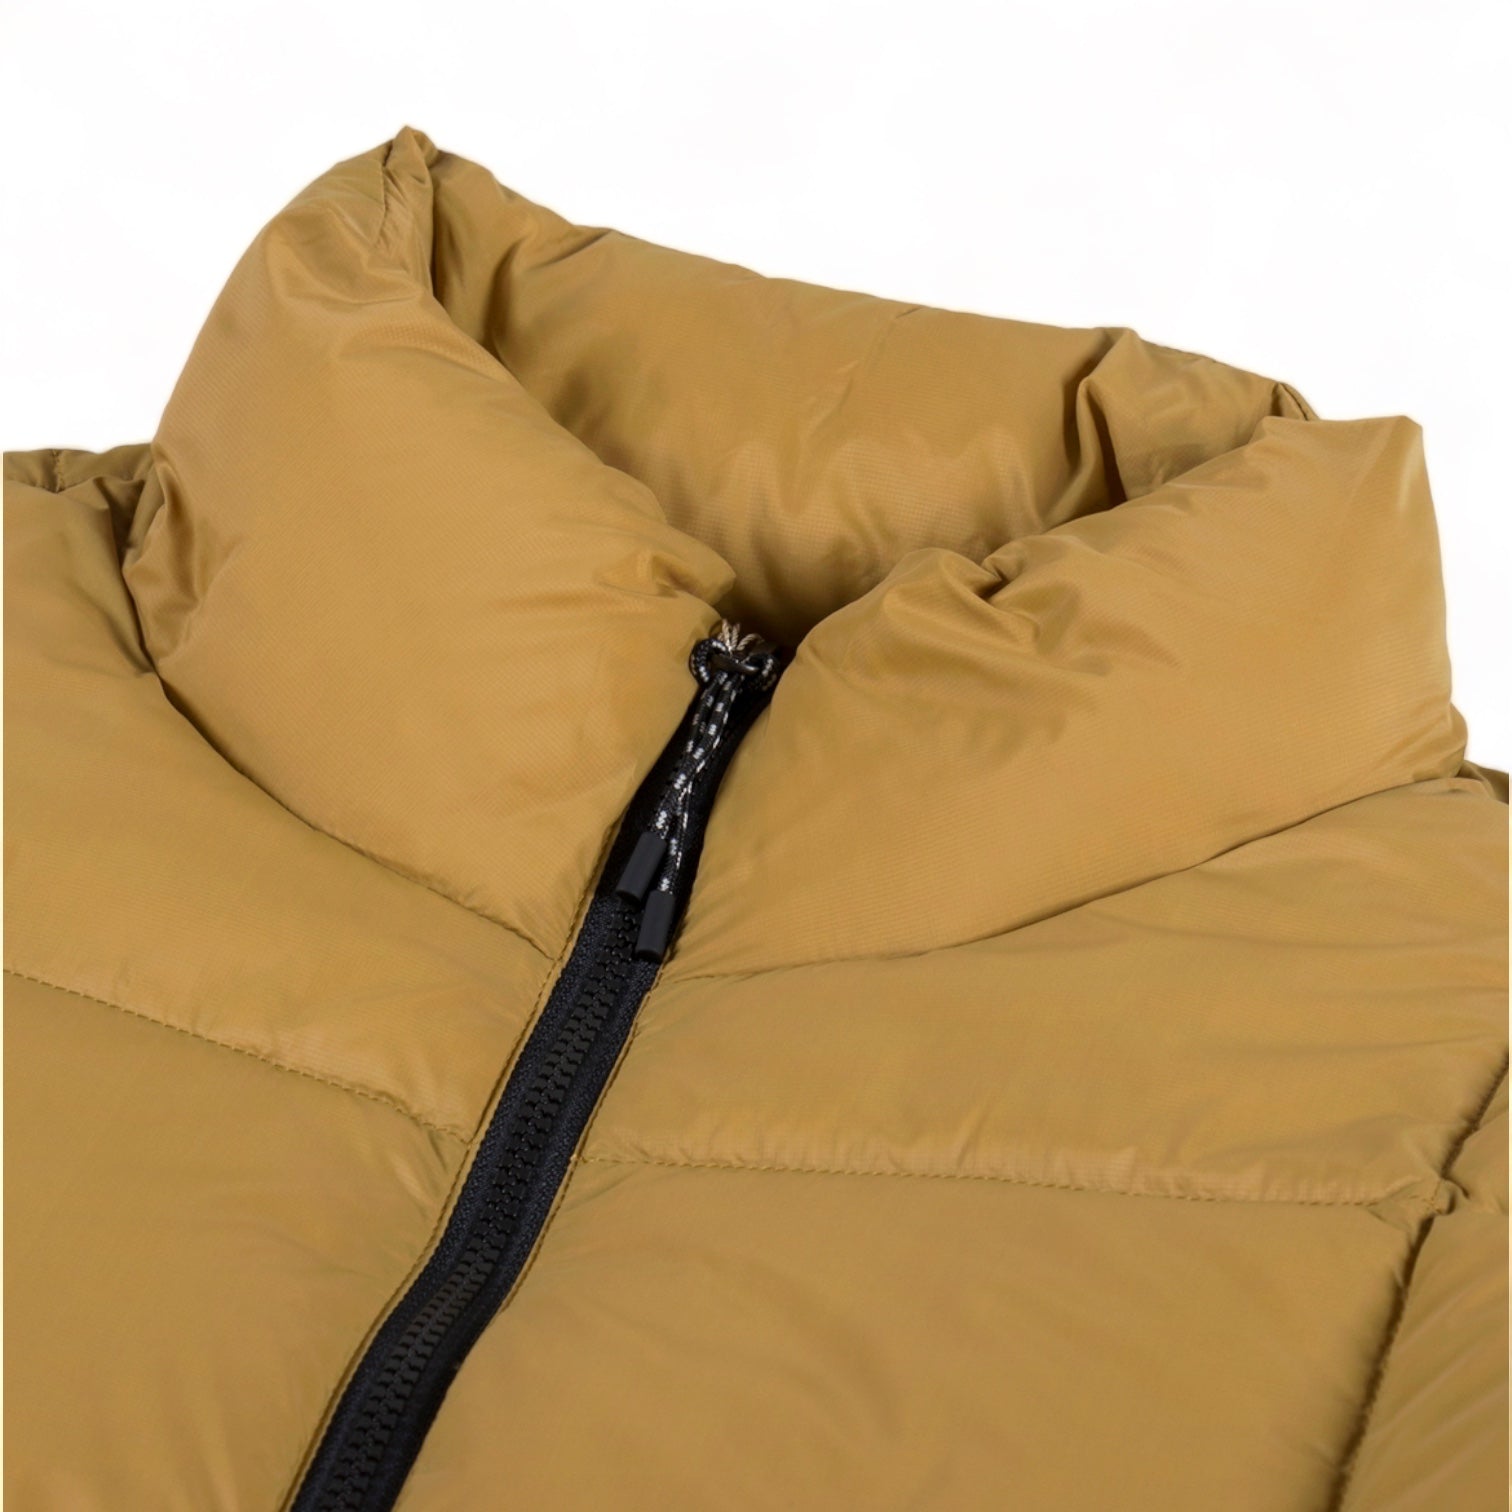 Taion - Mountain Packable Volume Down Jacket (Beige)